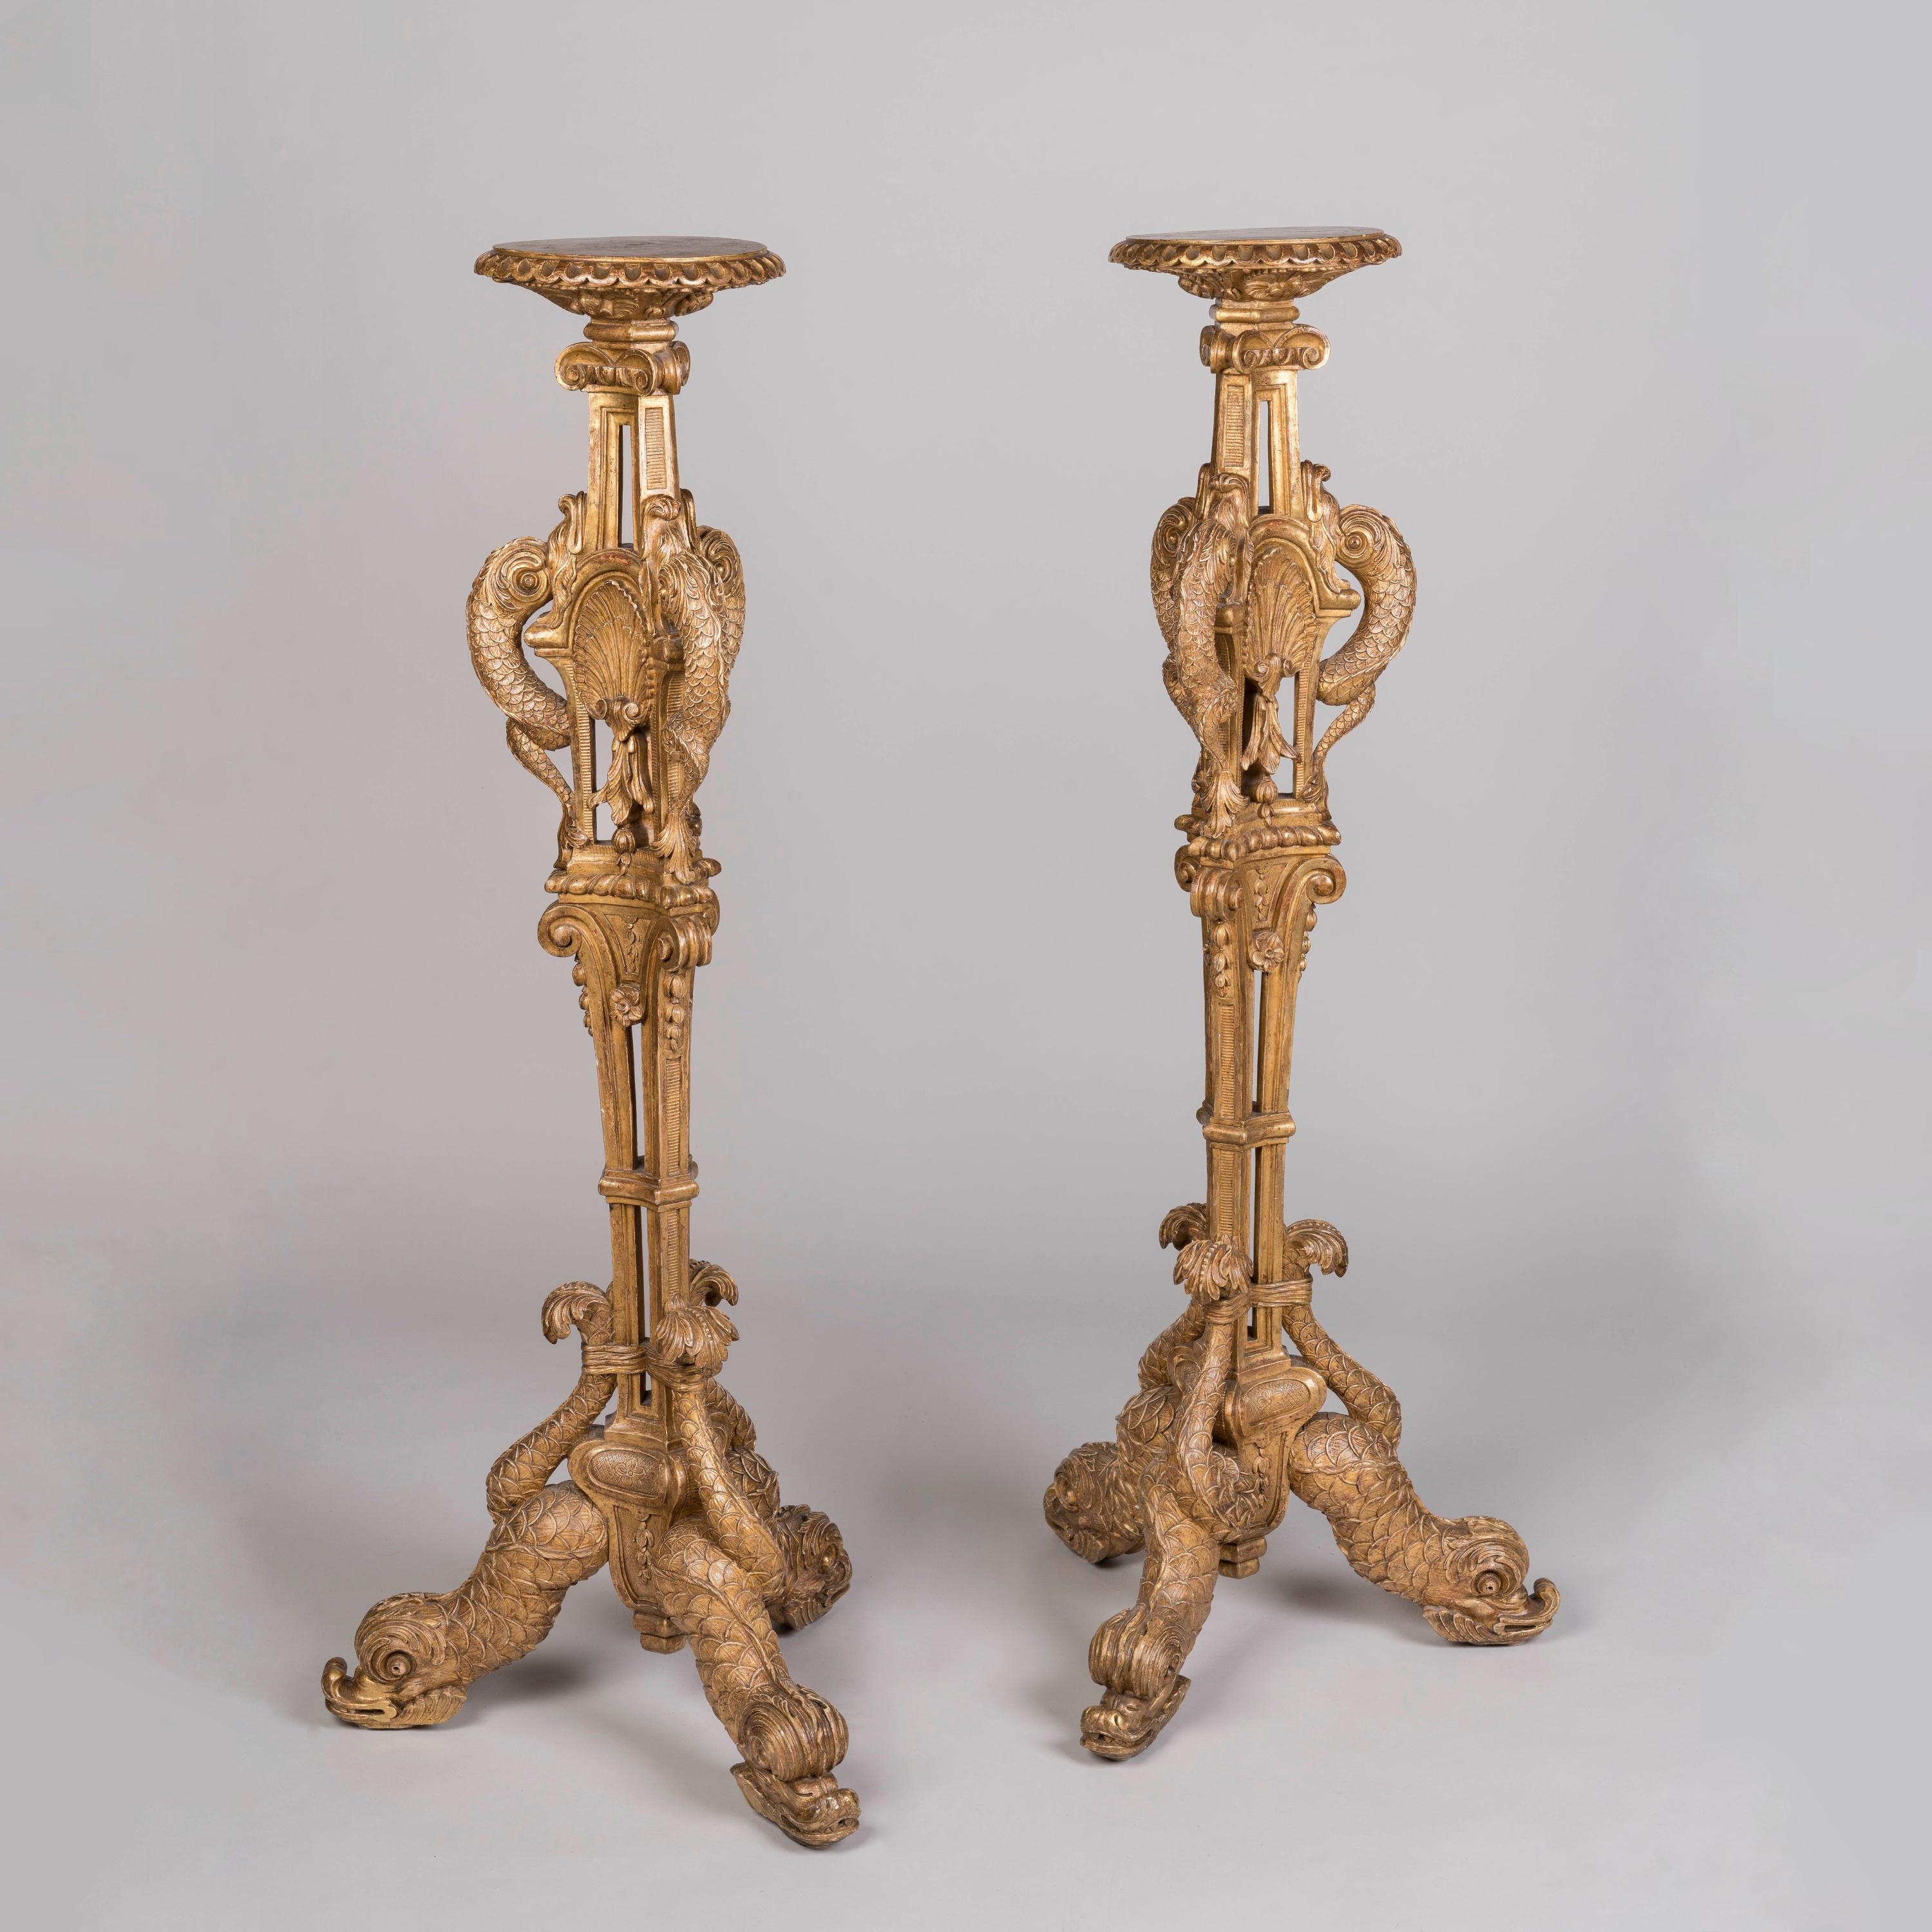 A Pair of Carved Giltwood 'Torchères Aux Dauphins'

A rare and magnificent pair of torchères carved from solid wood, entirely gilded, rising from a tripartite base formed of addorsed and intertwined dolphins gathered around the central clustered